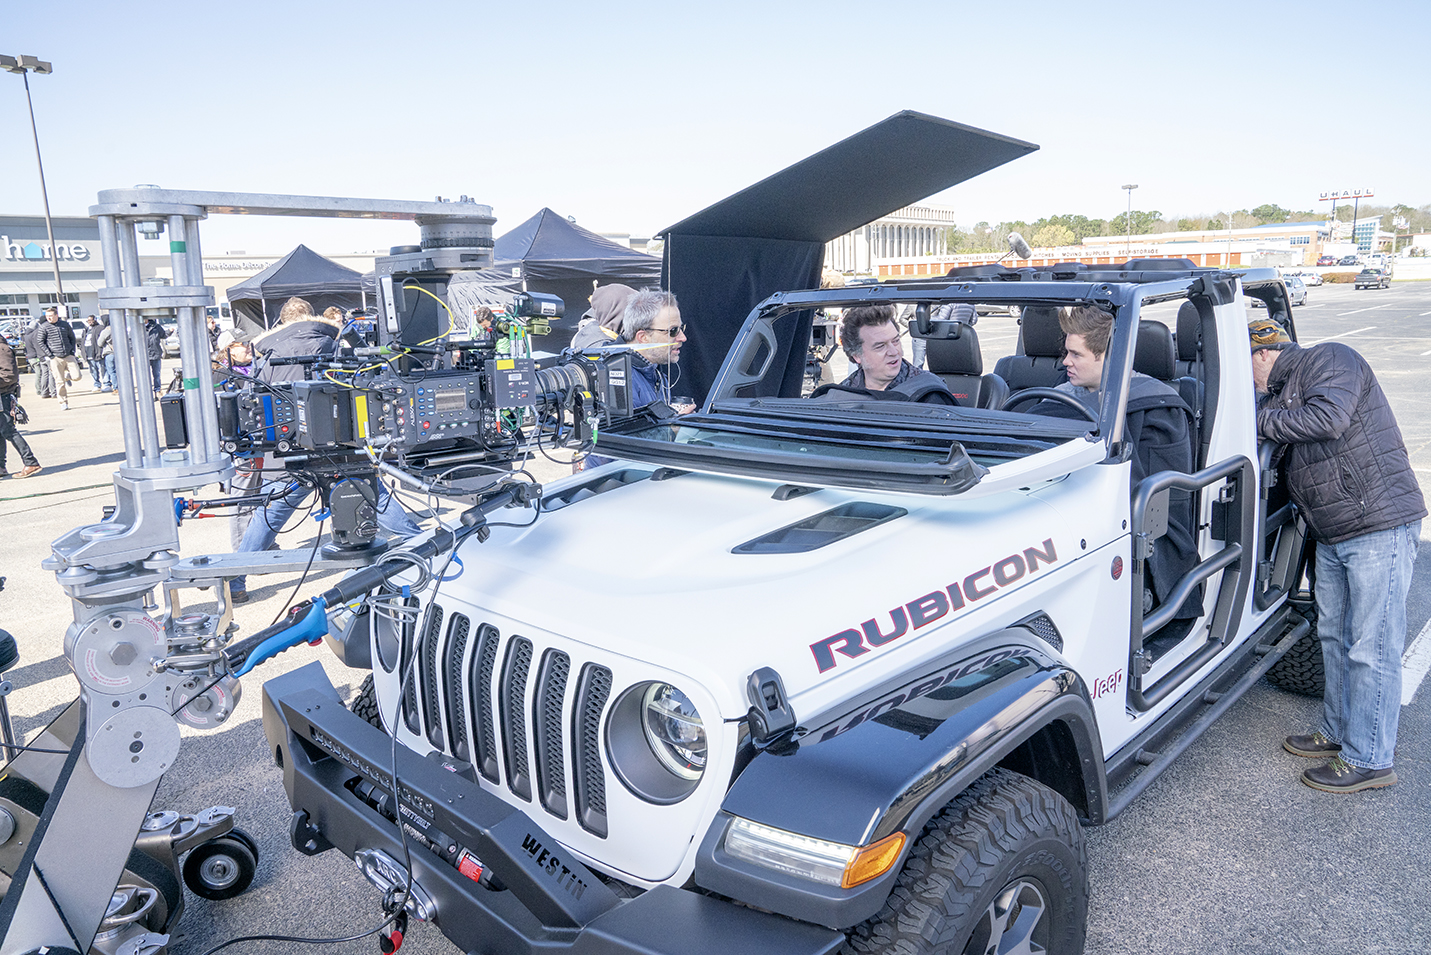 HBO film crews set up a shot for The Righteous Gemstones with actors Danny McBride (left) and Adam Devine in the At Home parking lot in North Charleston. (Photo/Fred Norris, HBO)